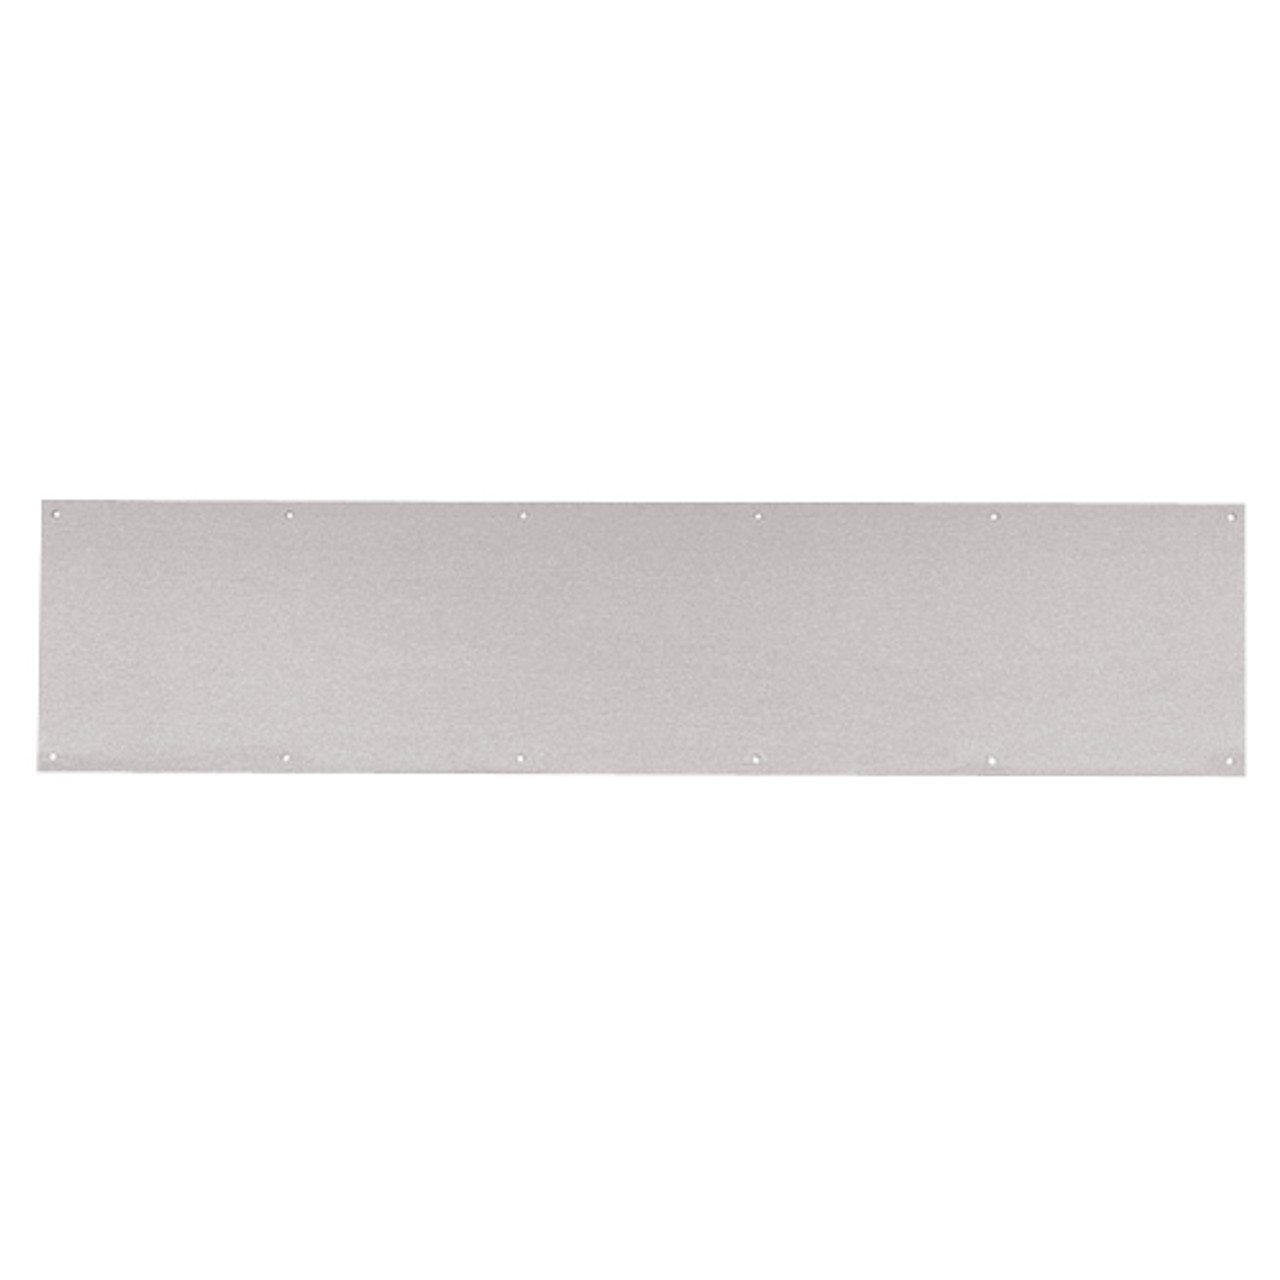 8400-US32D-16x35-B-CS Ives 8400 Series Protection Plate in Satin Stainless Steel